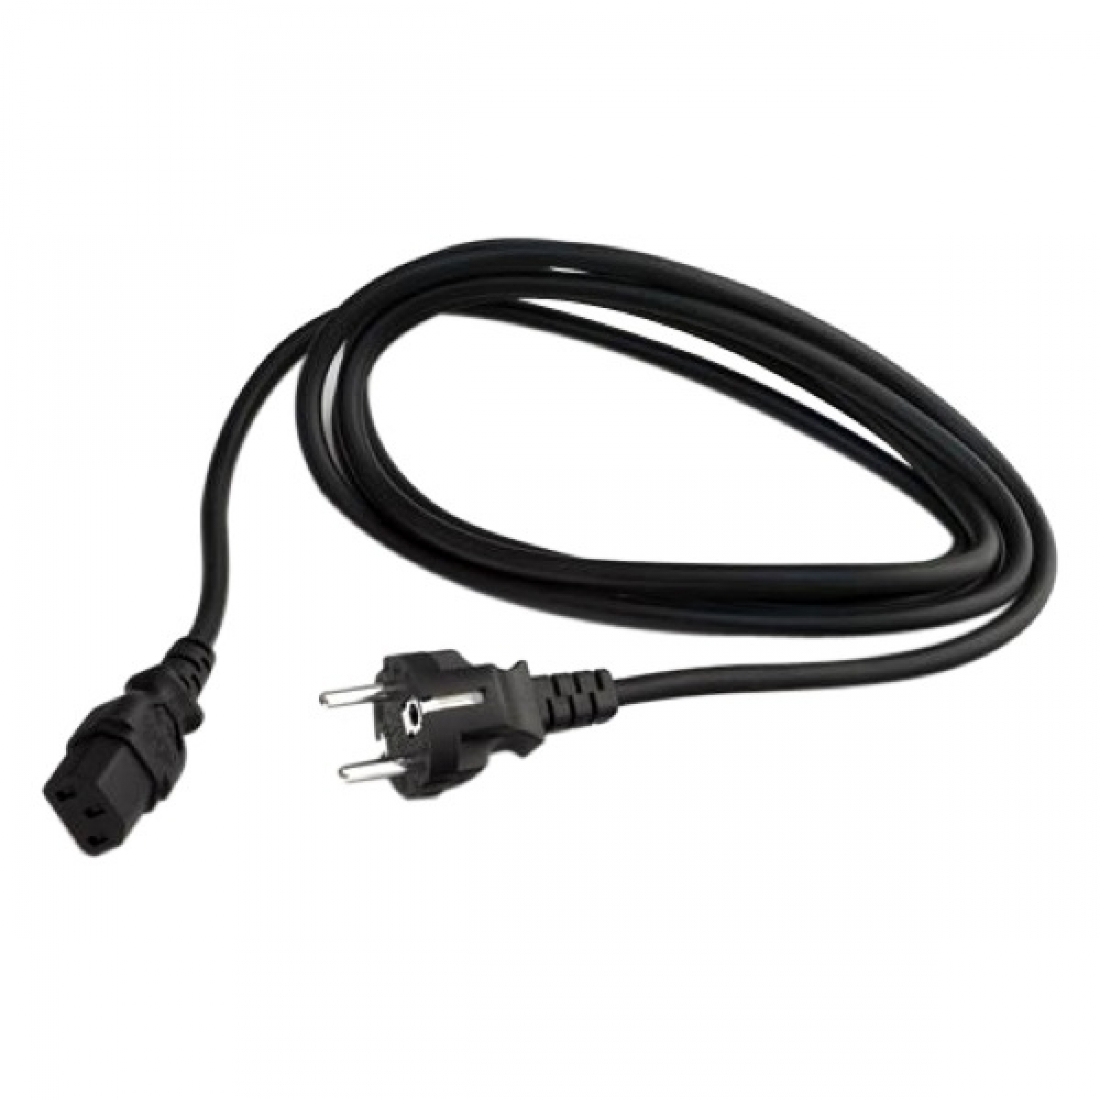 Power Cord Iec C13 Italy Rohs Dl Common Accessories 6003 0924 9999999999999